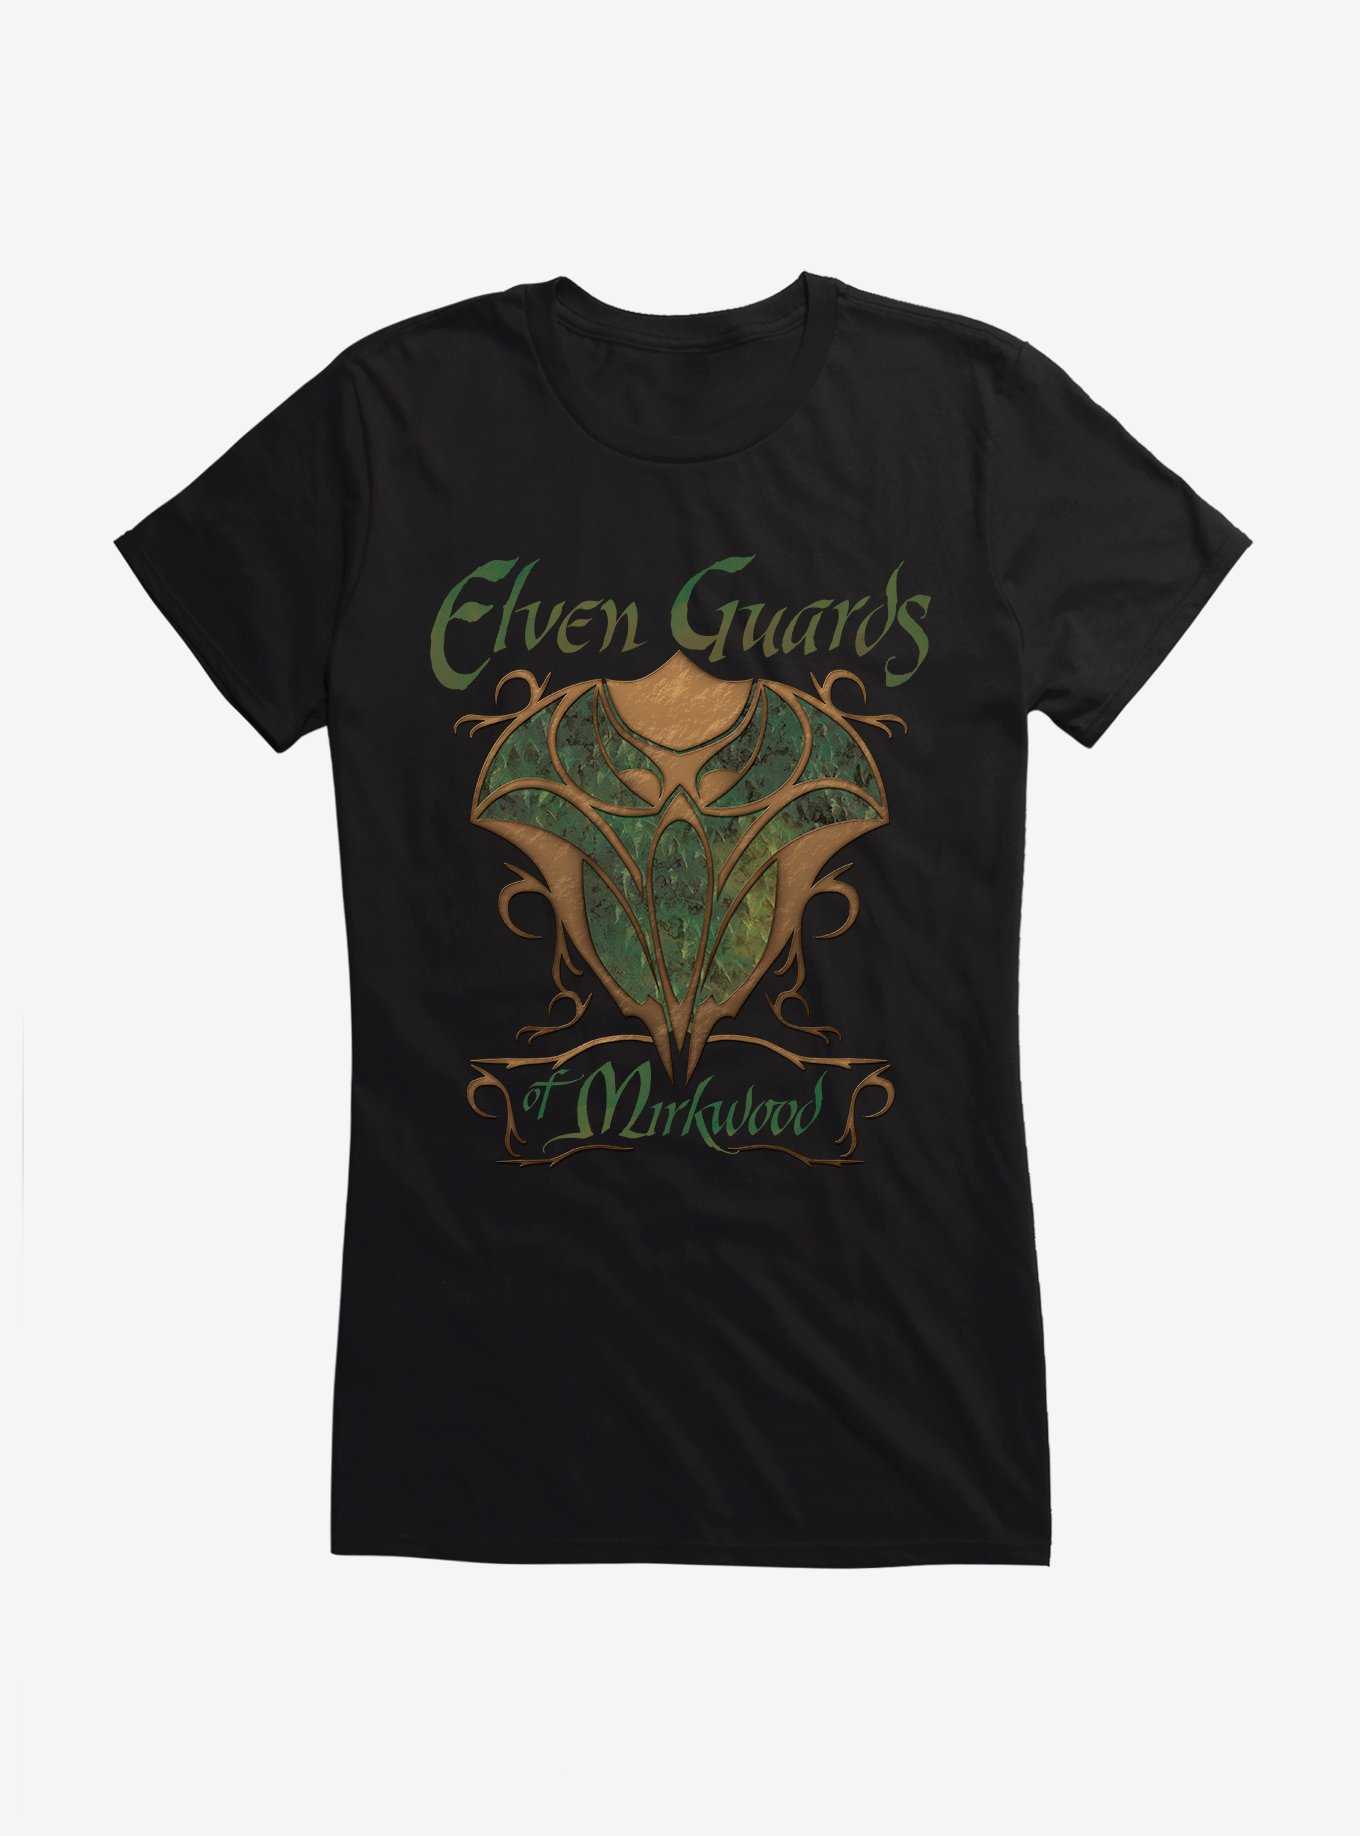 The Hobbit: The Desolation Of Smaug Elven Guards Of Mirkwood Seal Girls T-Shirt, , hi-res